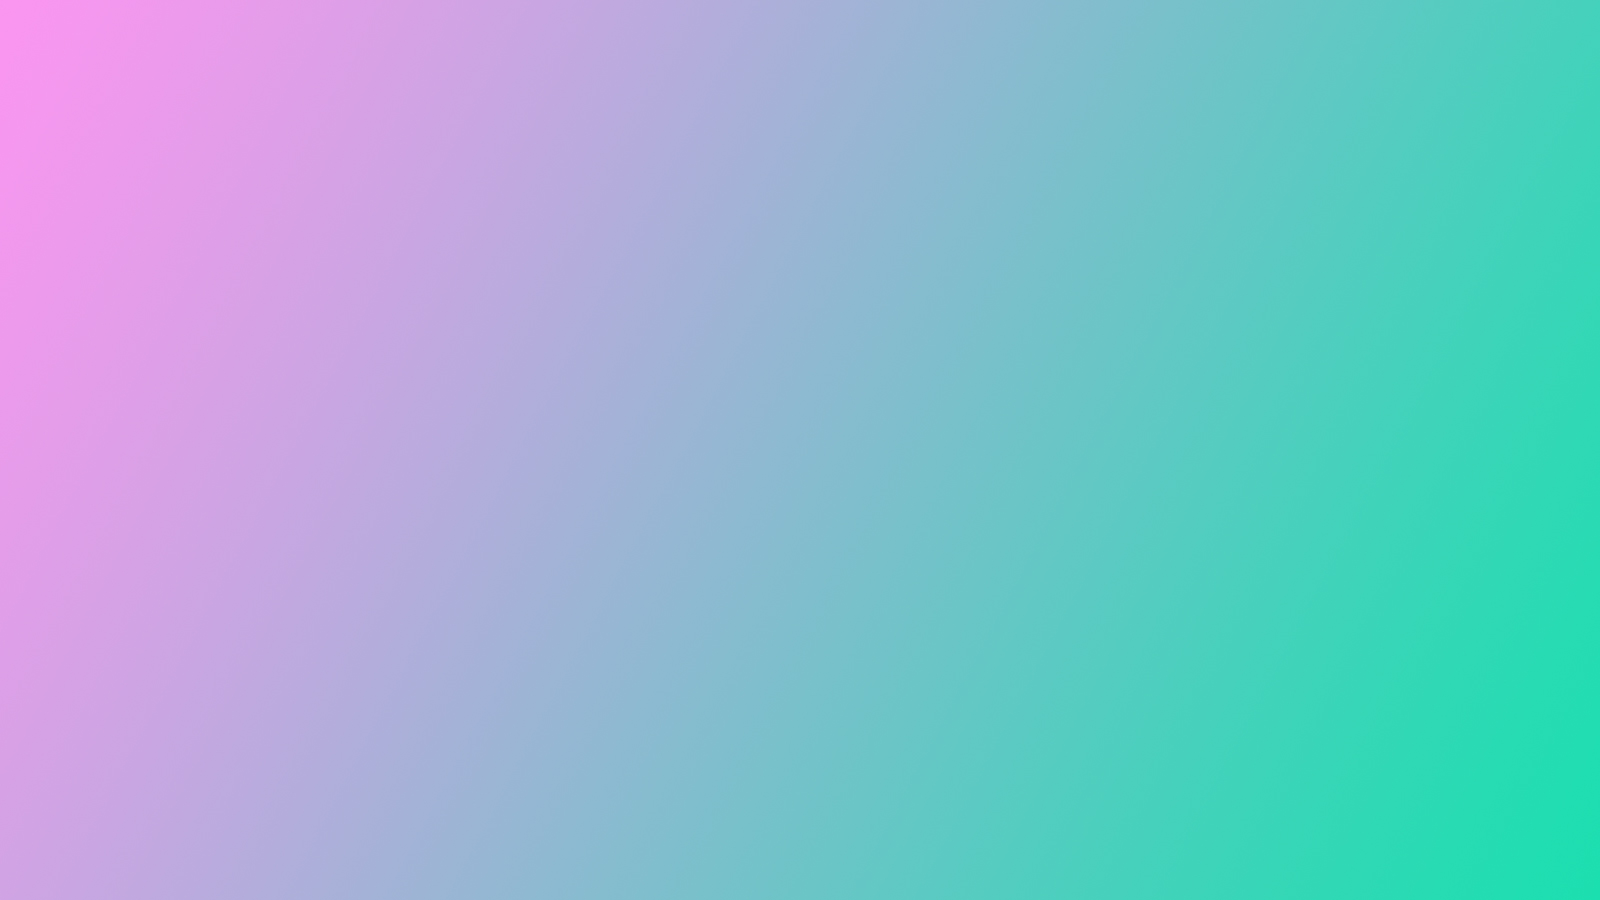 Pastel Blue Tumblr Backgrounds Images Pictures   Becuo 1600x900